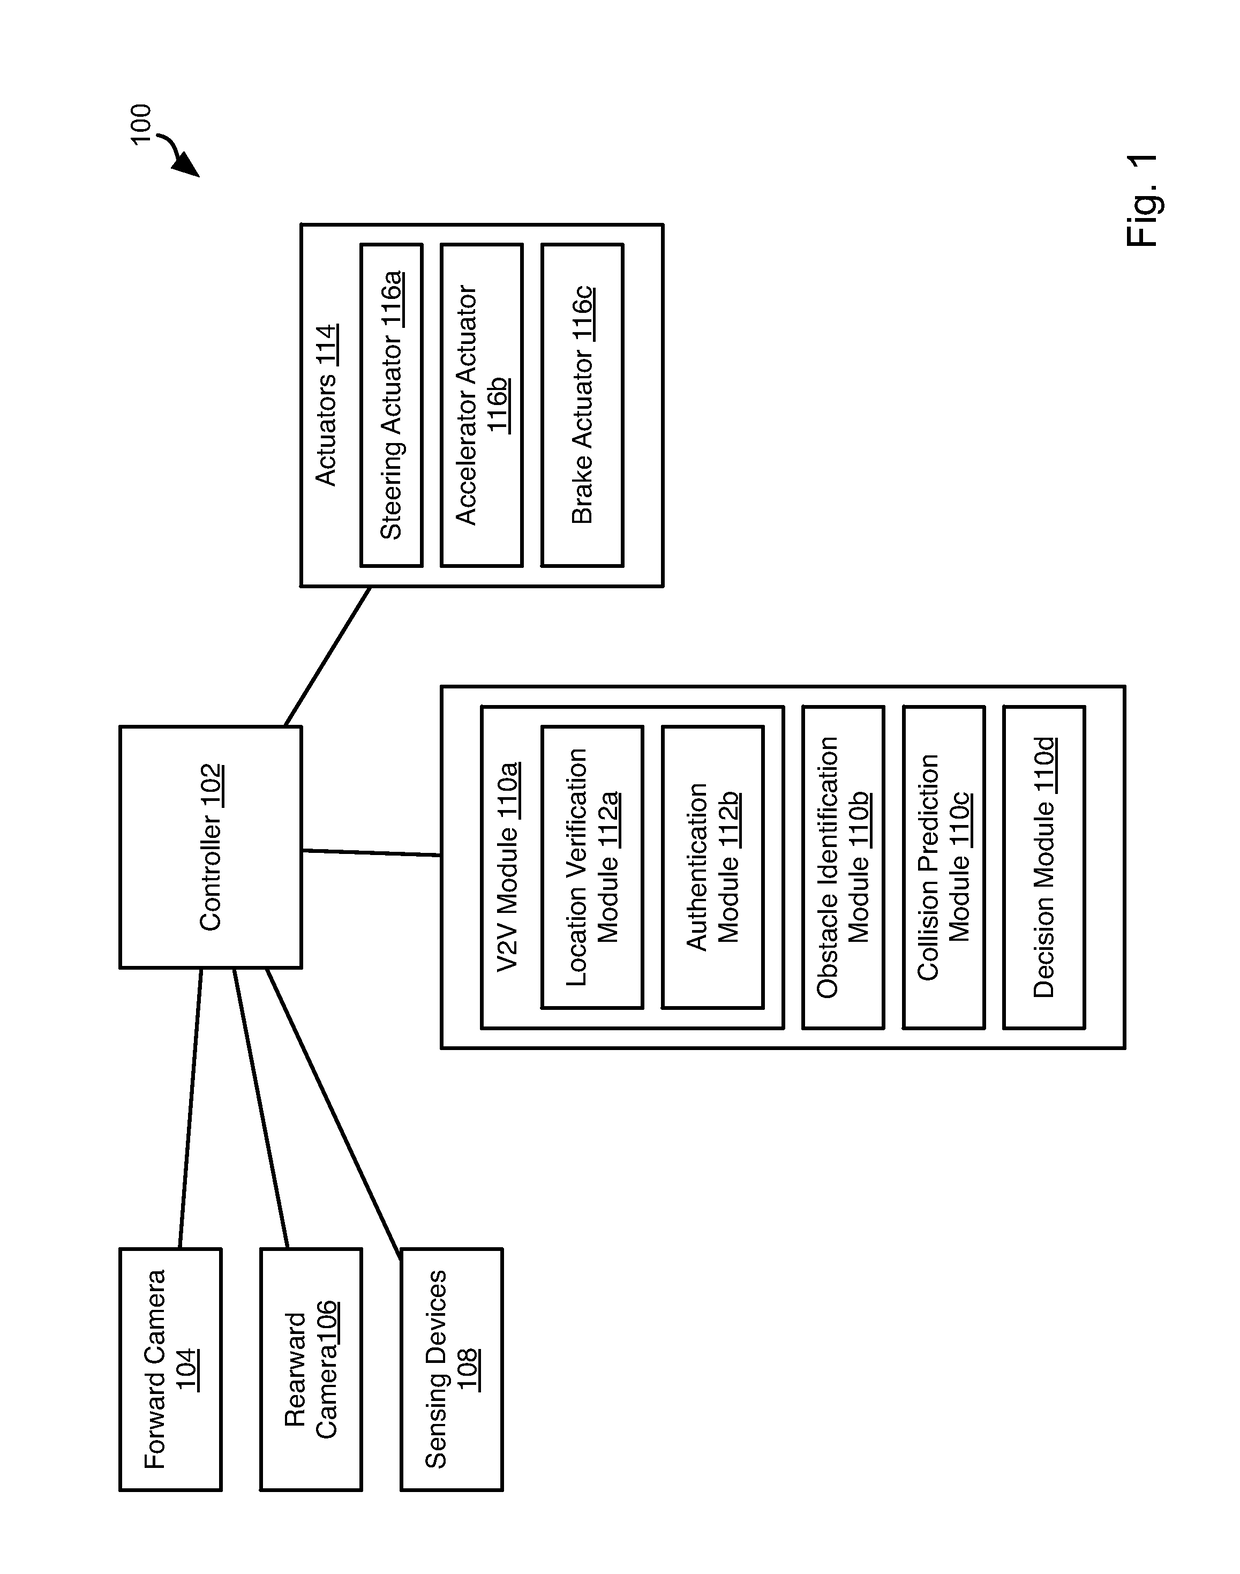 Inter-vehicle authentication using visual contextual information